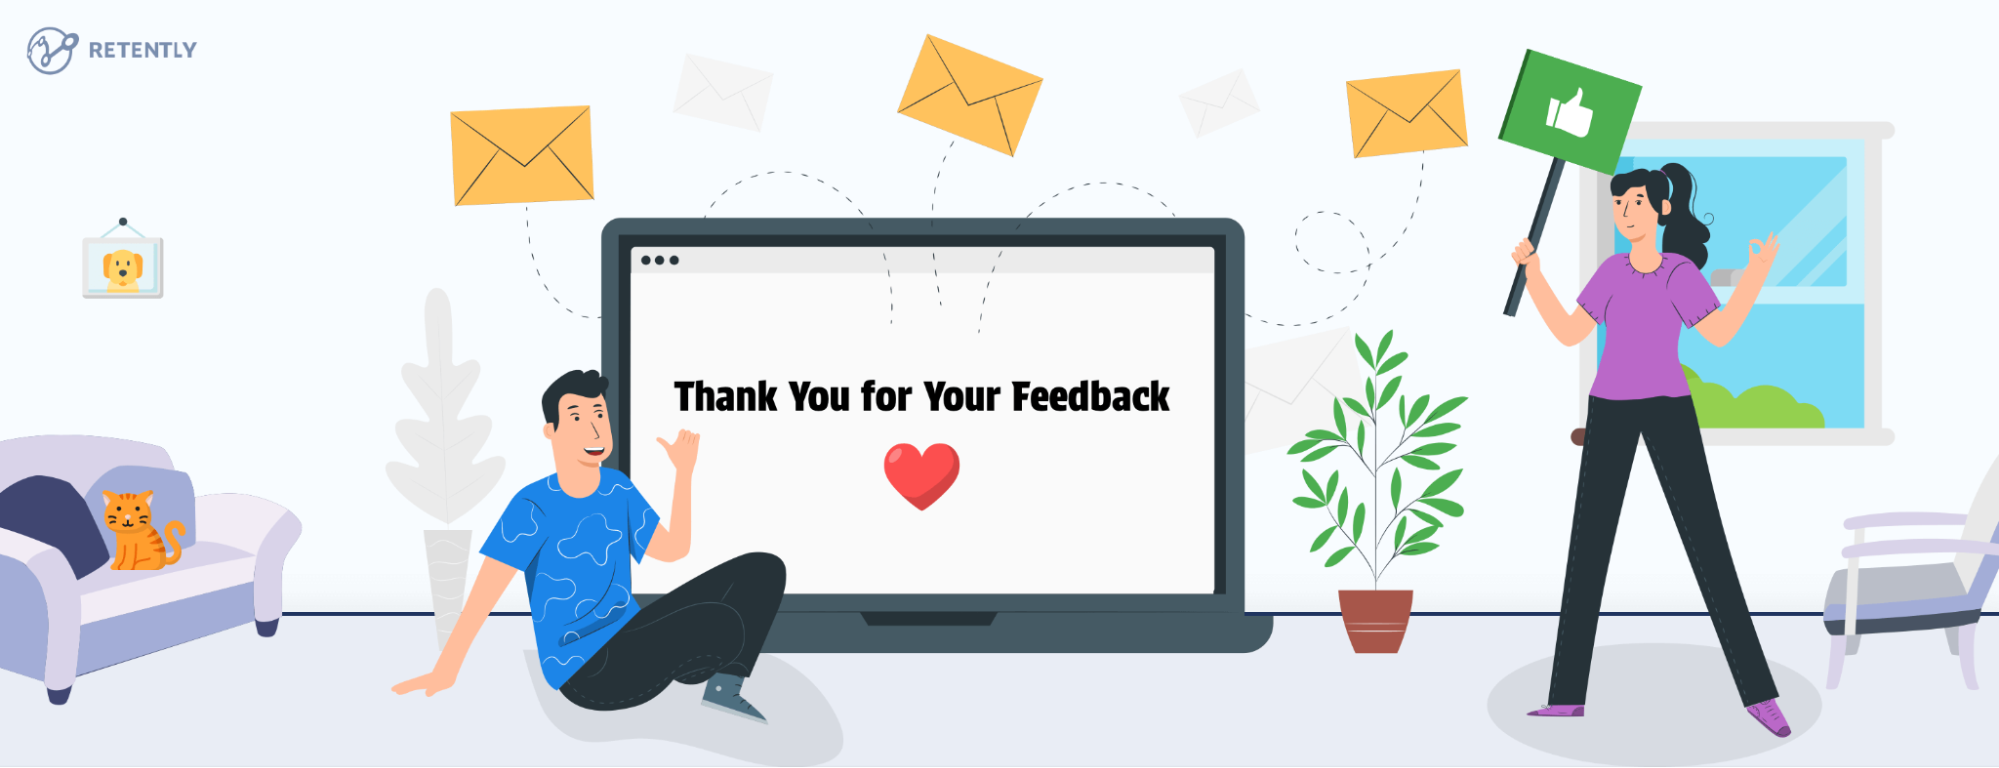 25 Top “Thank You for Your Feedback” Responses for Improved Customer Relations